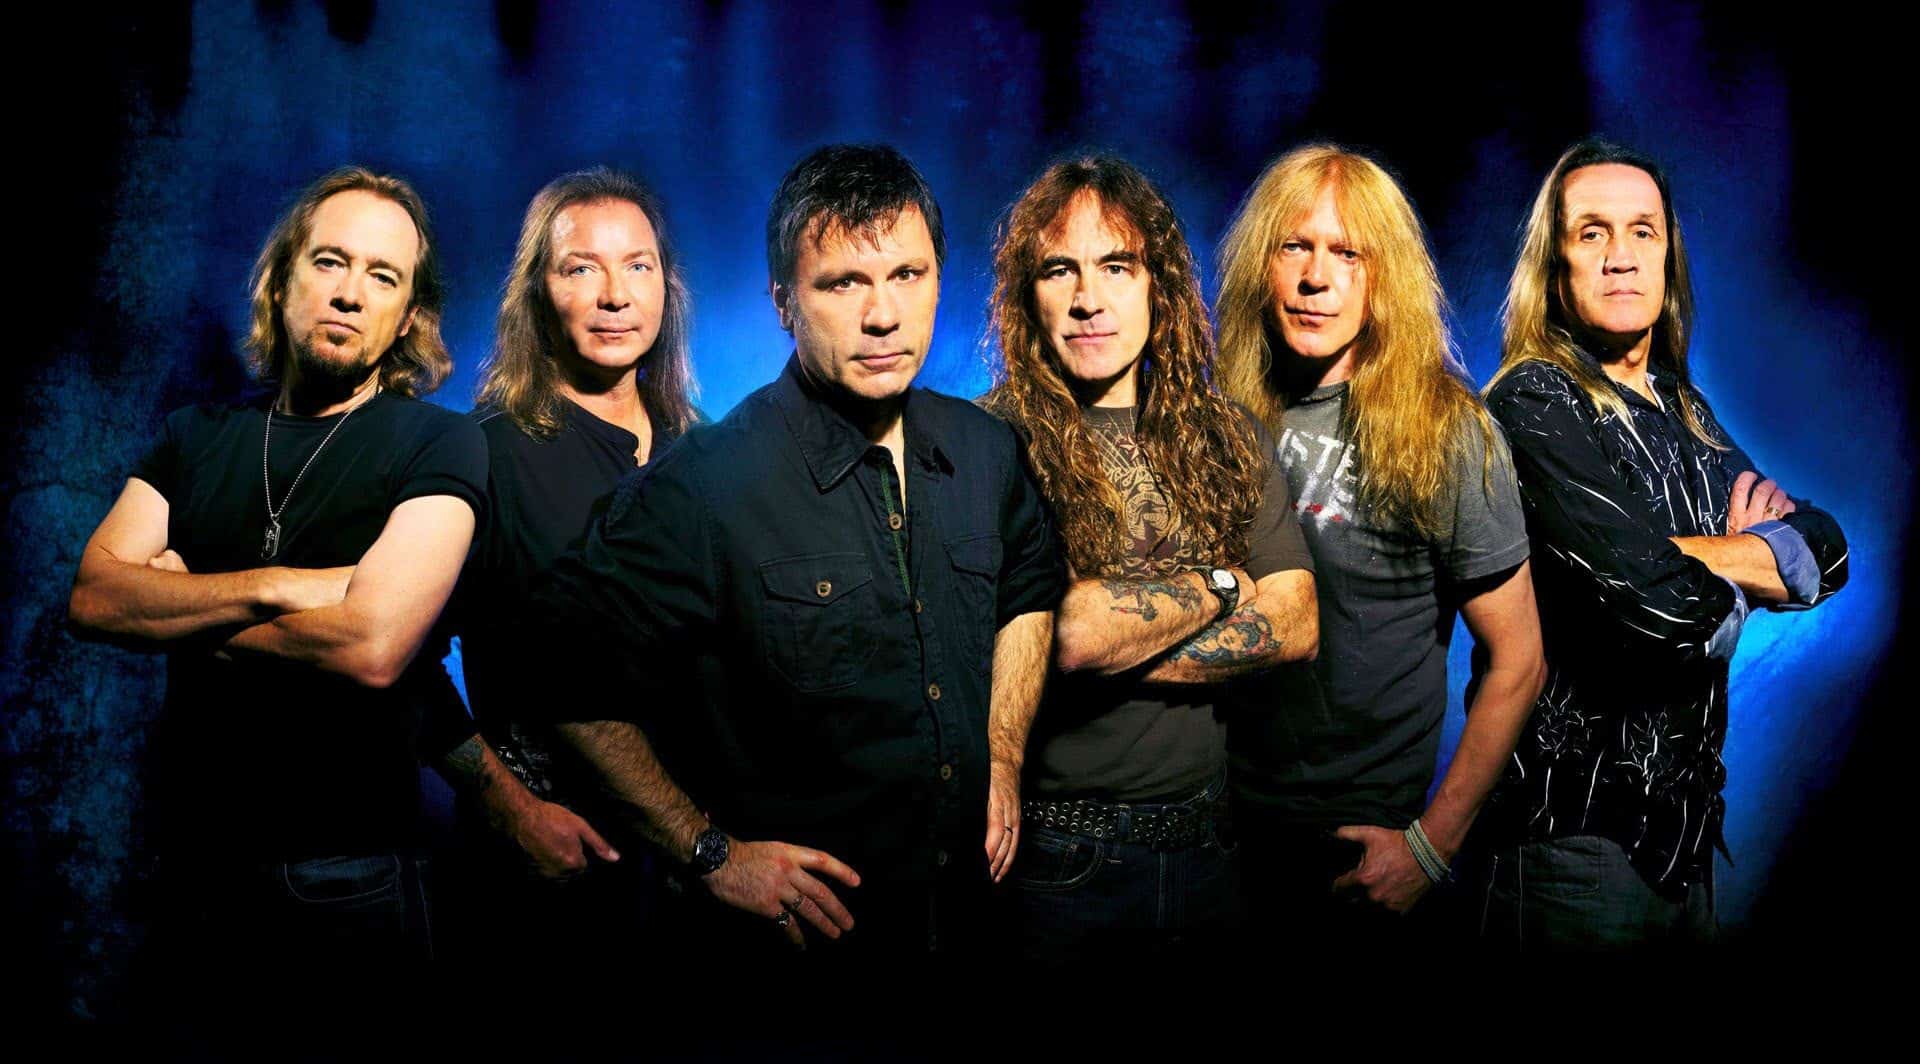 The 10 best Iron Maiden songs of all time